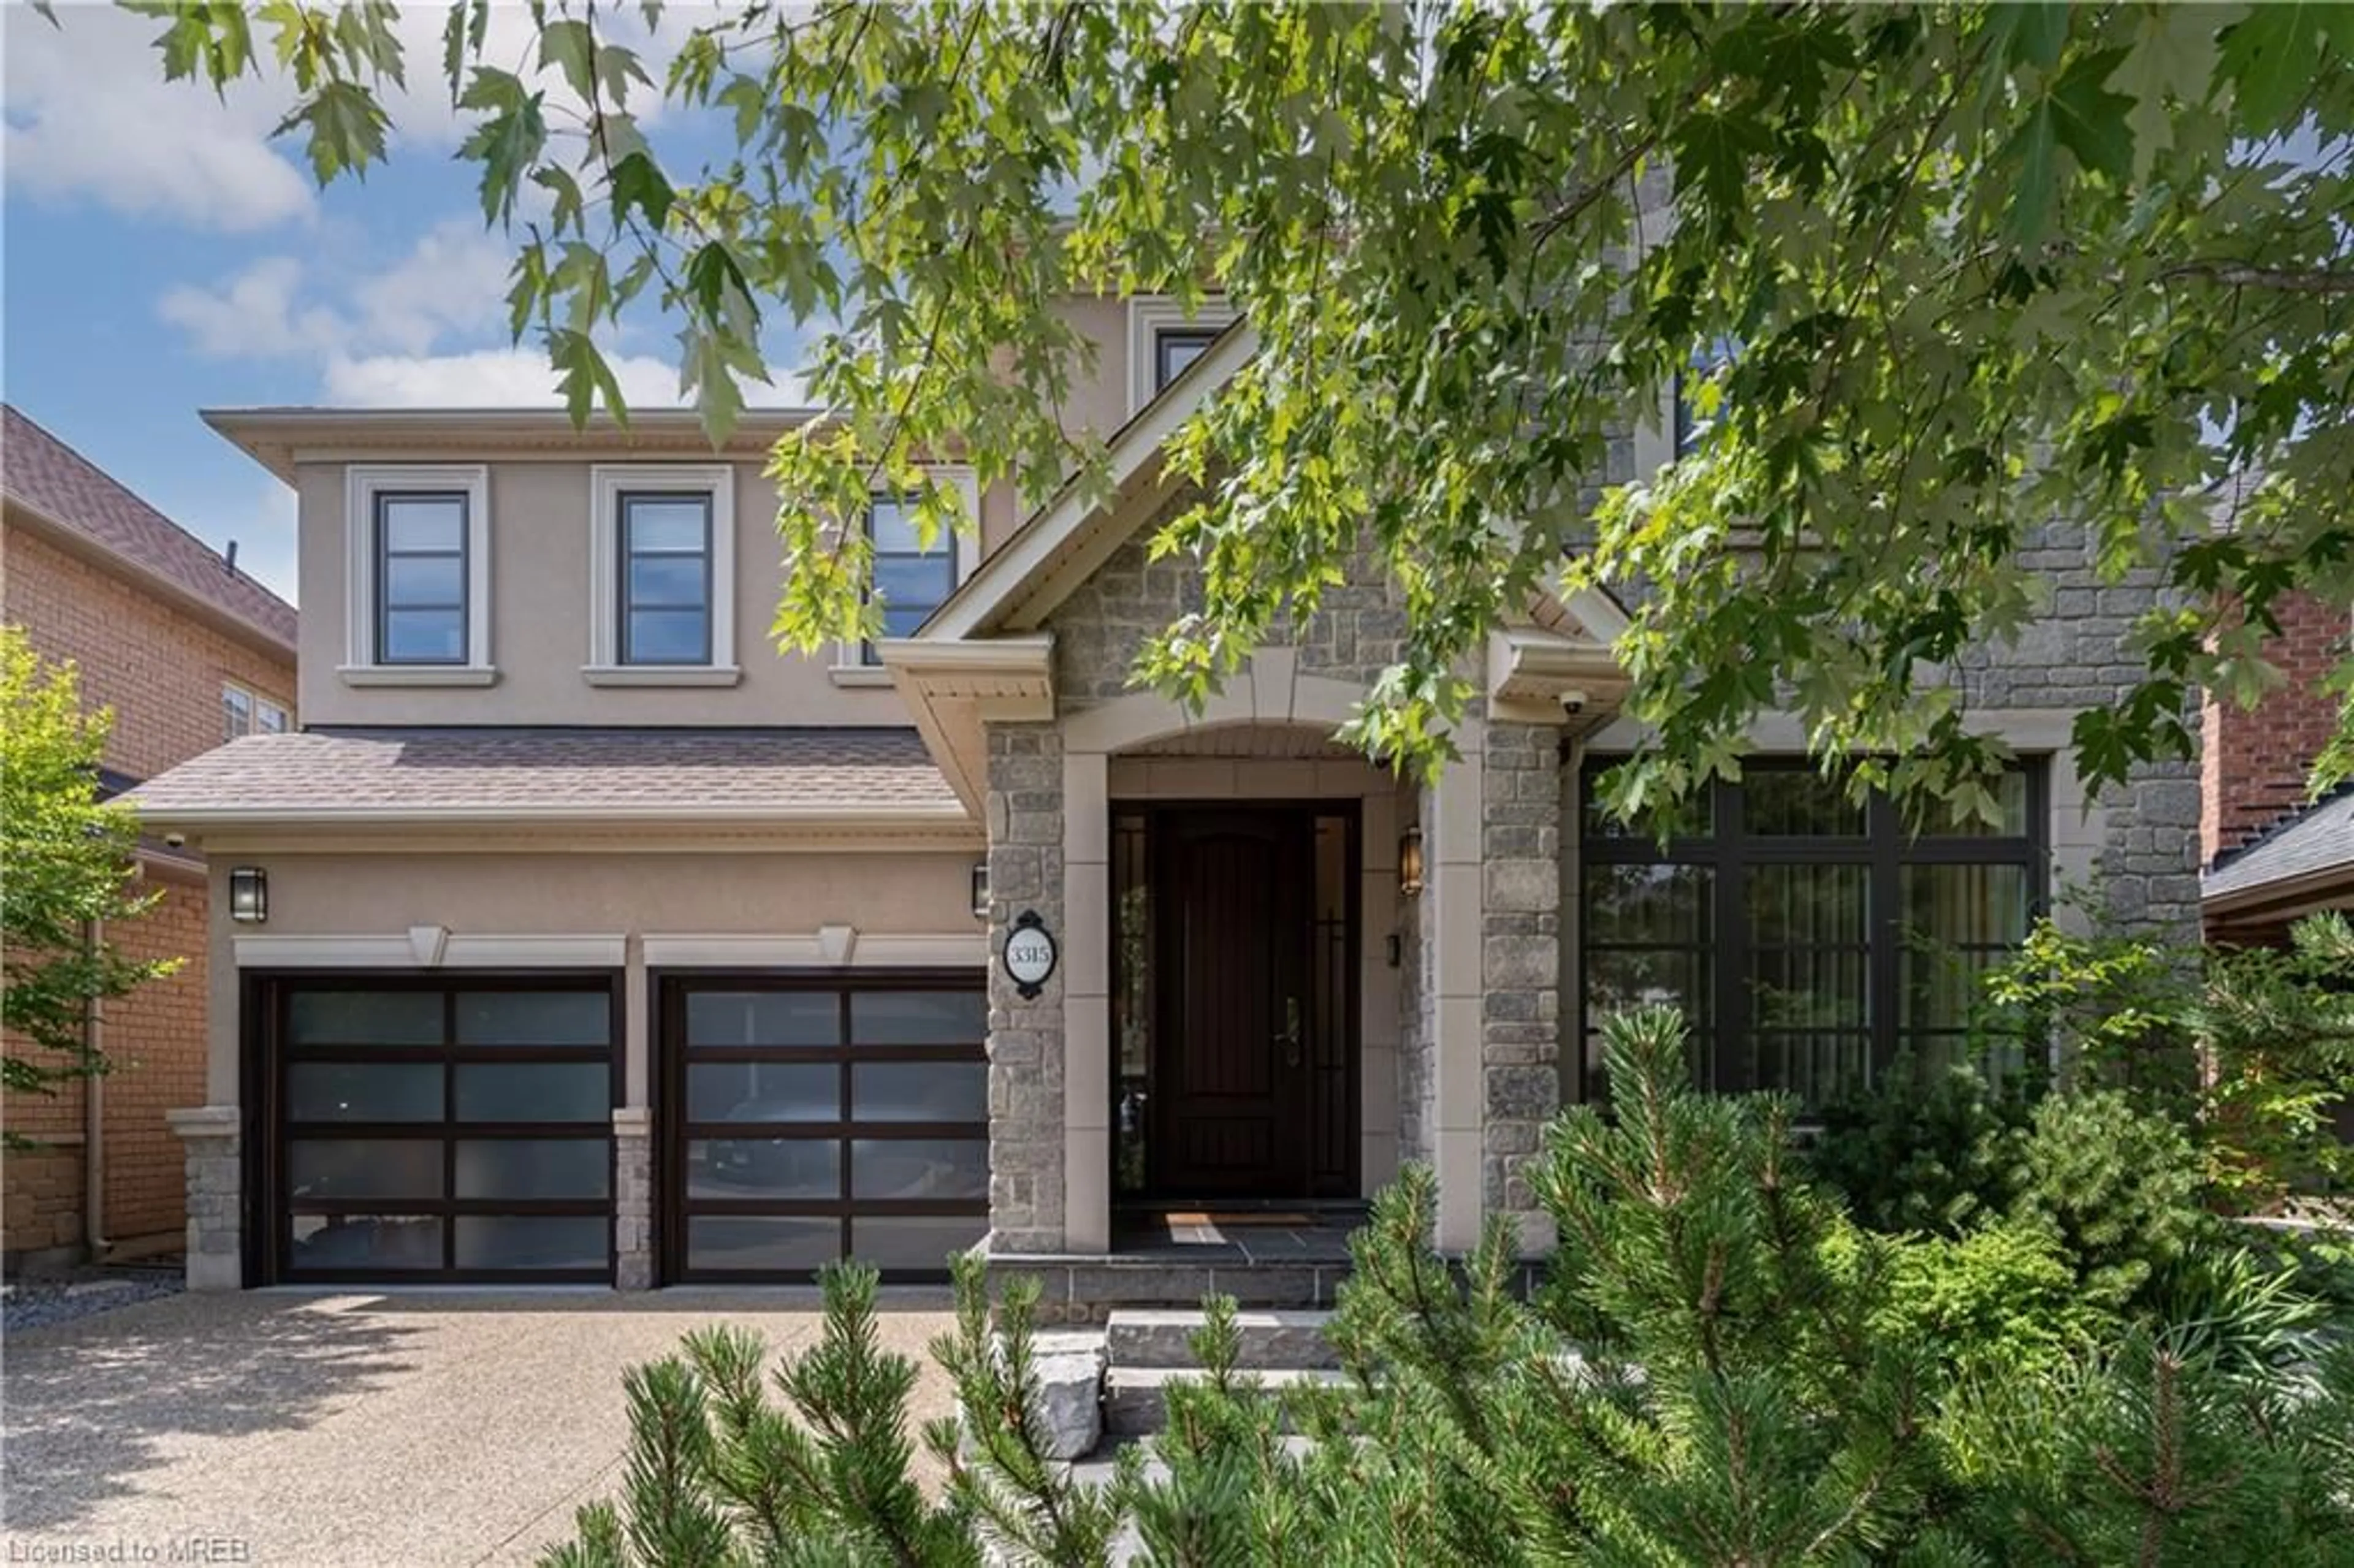 Home with brick exterior material for 3315 Raspberry Bush Trail, Oakville Ontario L6L 6V6